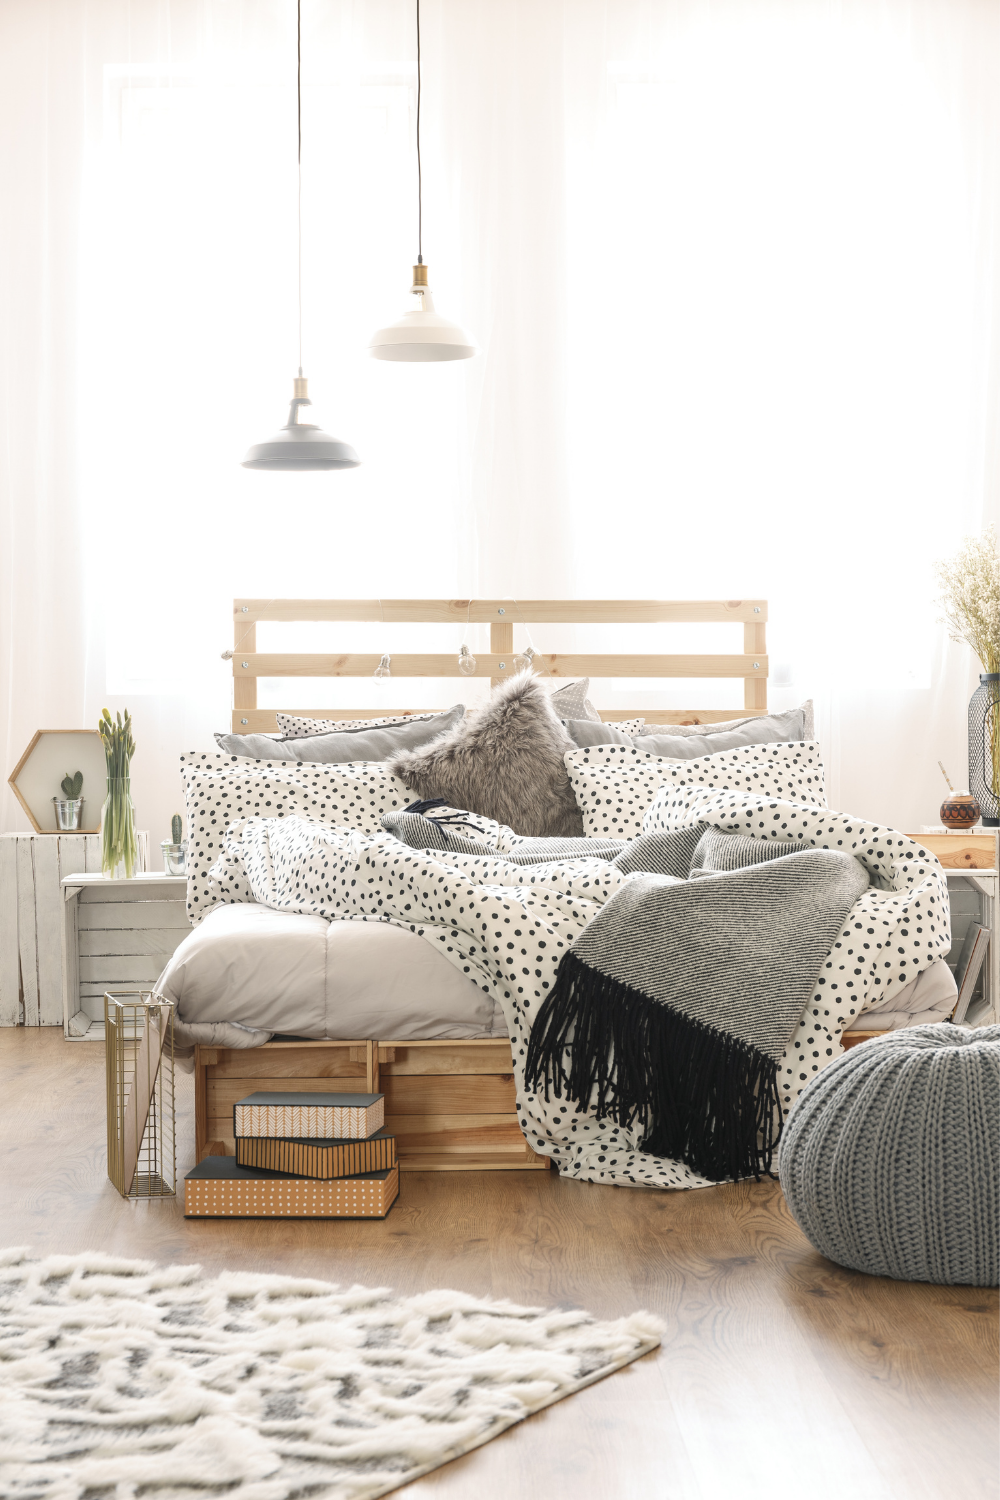 Top Tips For A Comfortable And Stylish Bedroom